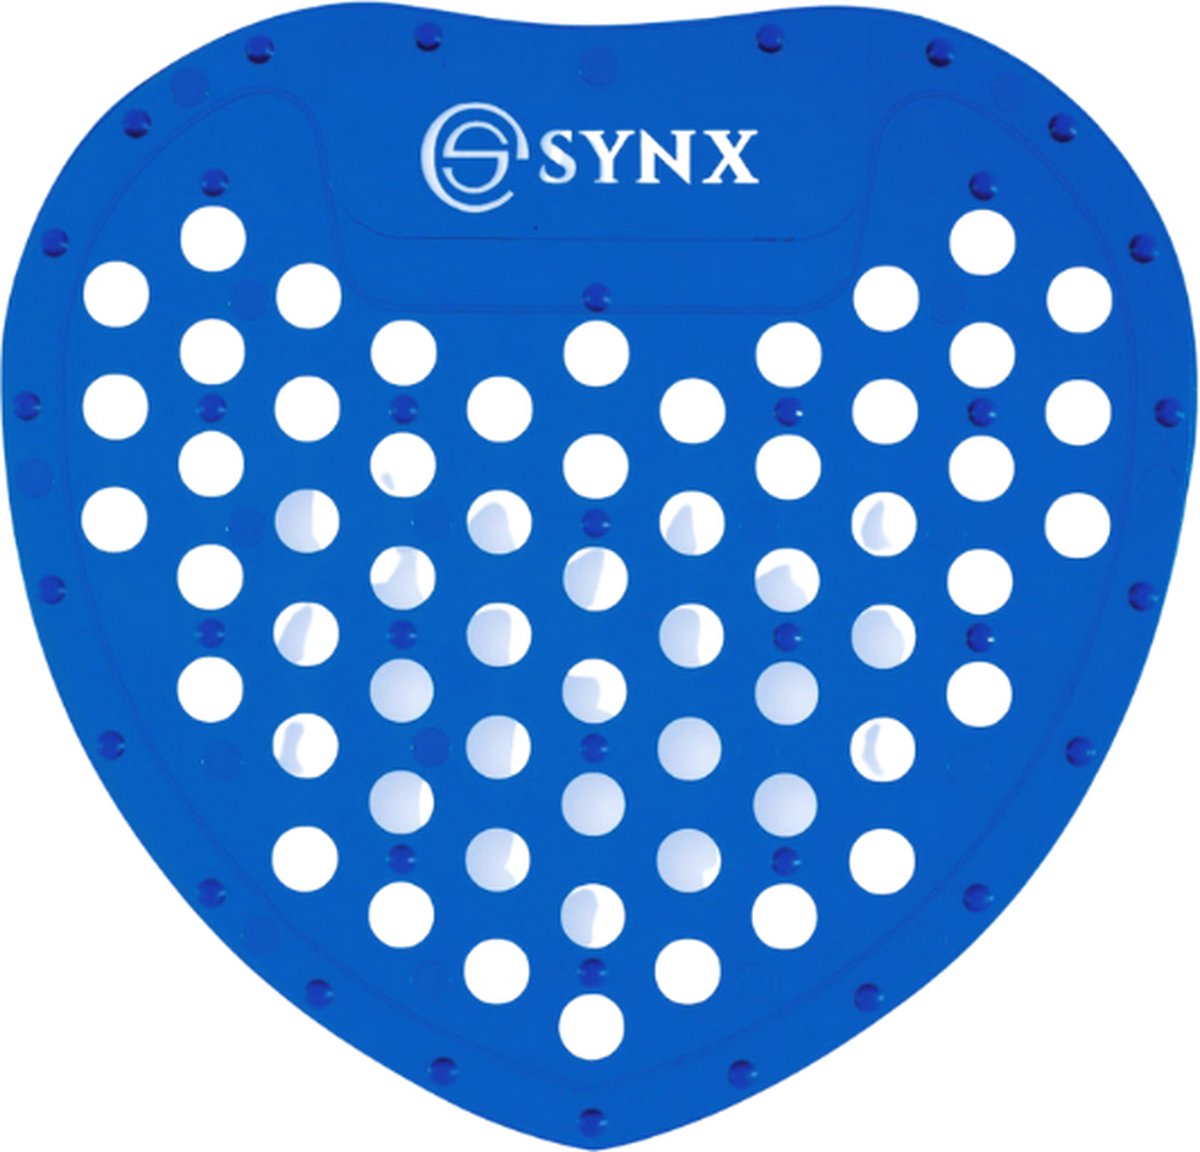 Synx Tools Urinoir Matje - Urinoirrooster -  Wc Rooster